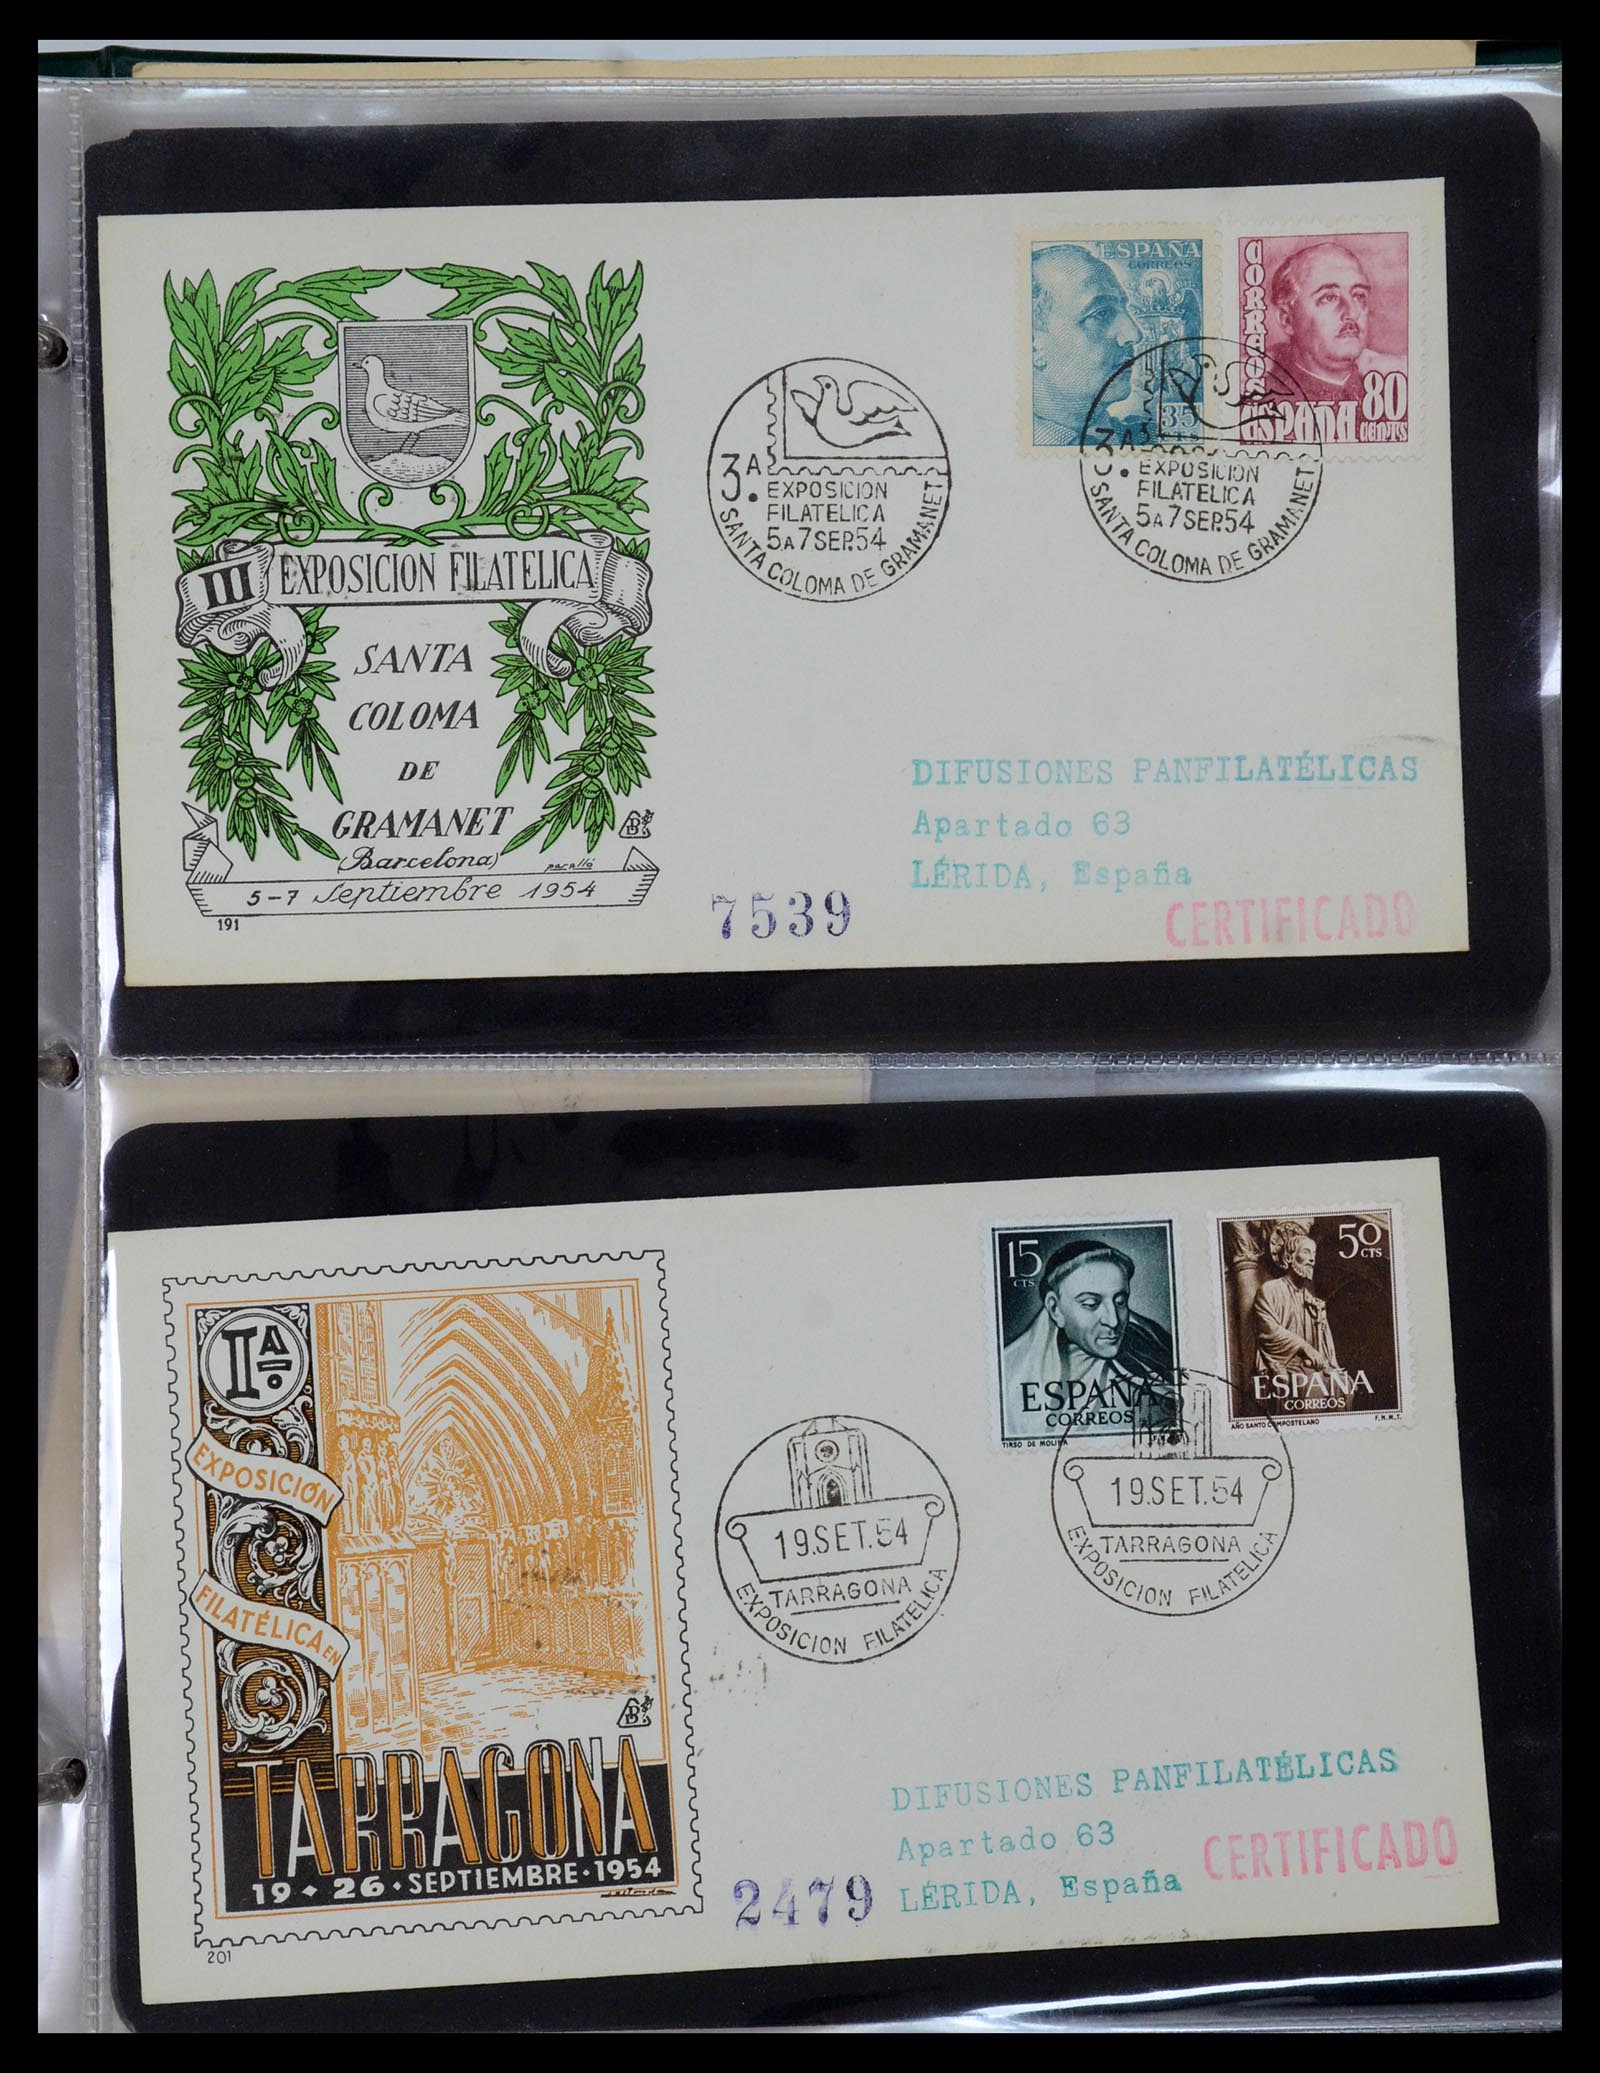 35736 033 - Stamp Collection 35736 World airmail covers.